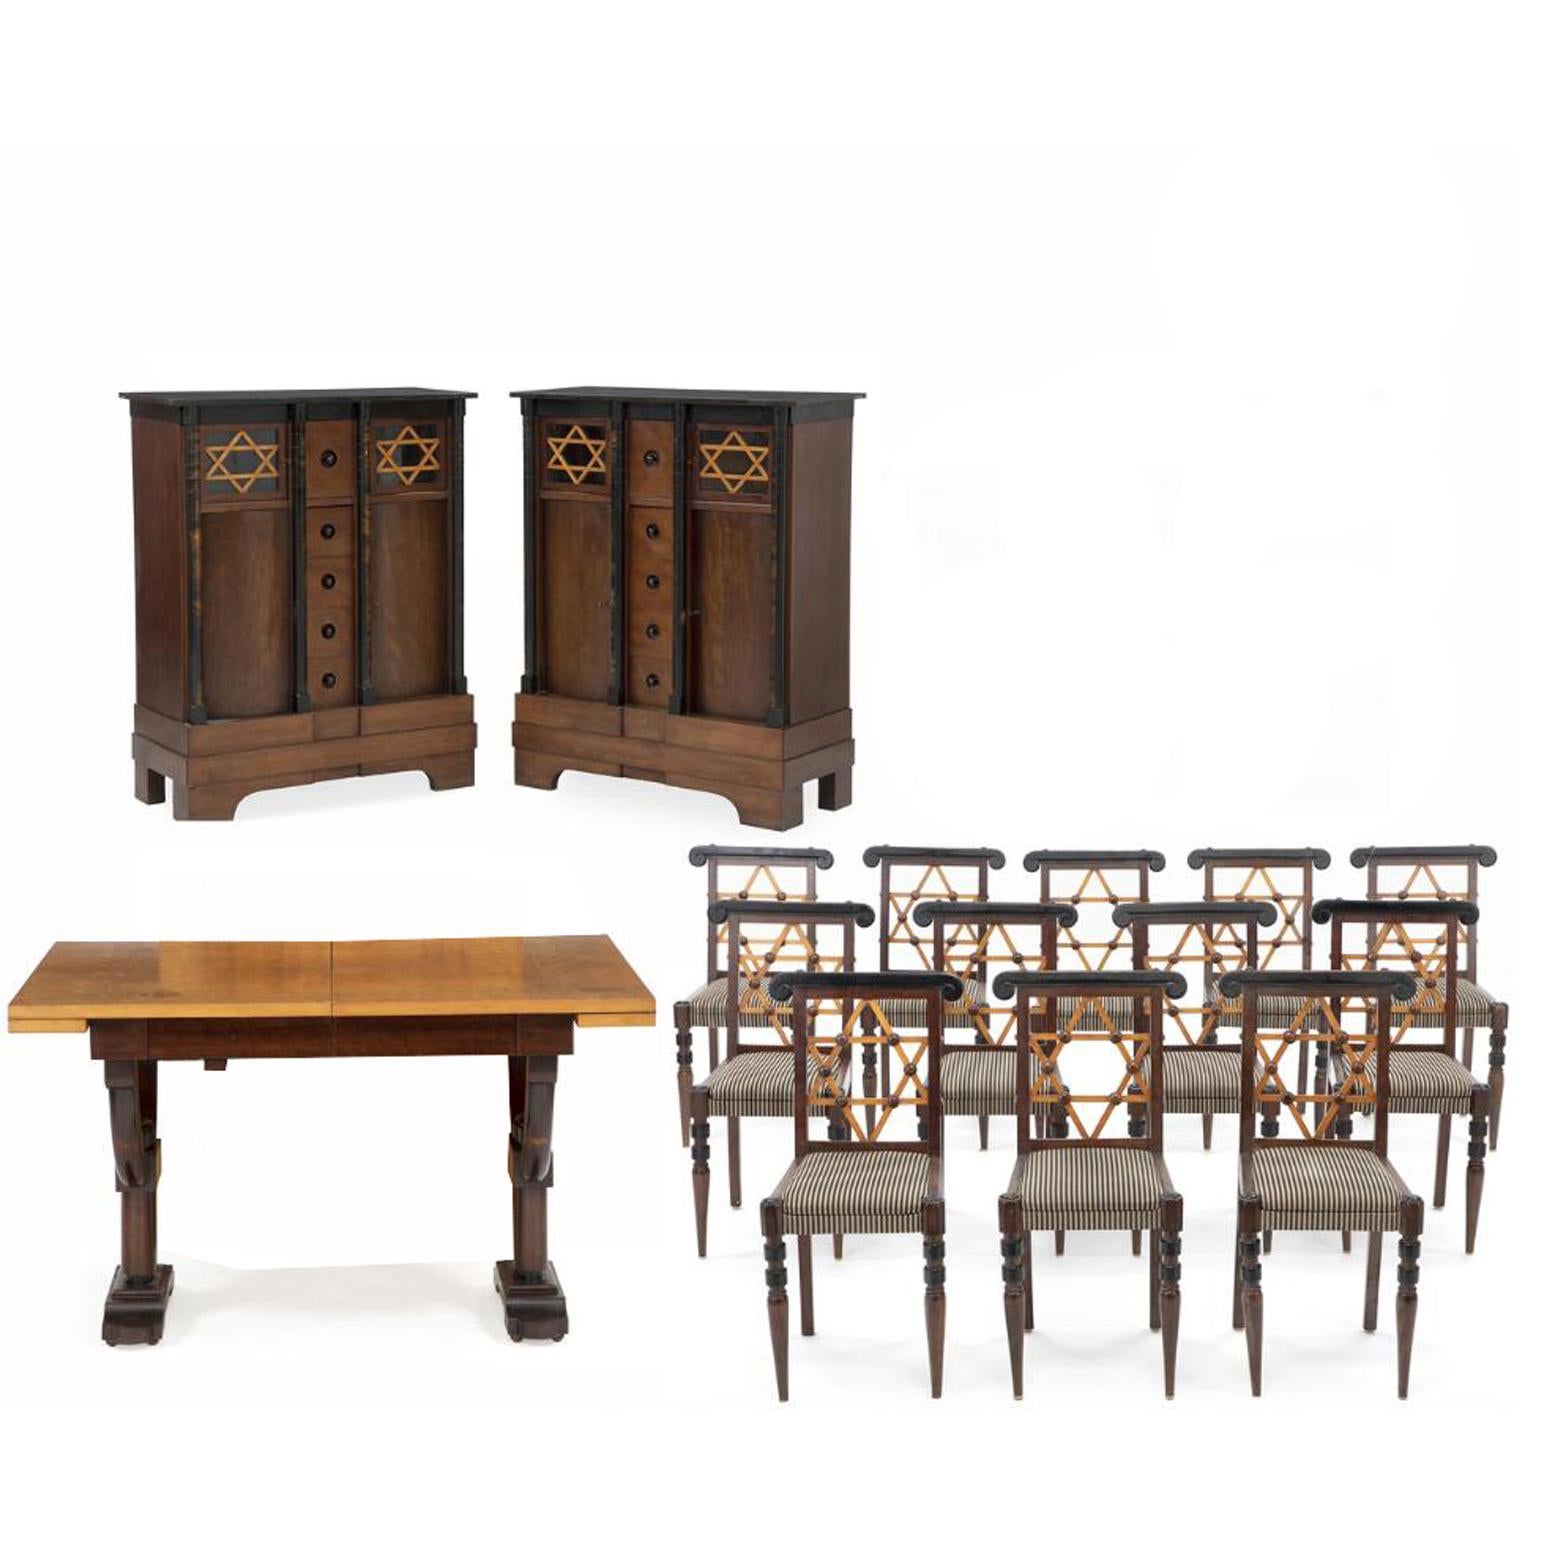 One of a kind rare Judaica suite 
Unique dining room of stained beech with numerous decorations/carvings, consisting of table with extension and three leaves two cabinets with loose stone tops, and 12 chairs. Chair seat upholstered with striped